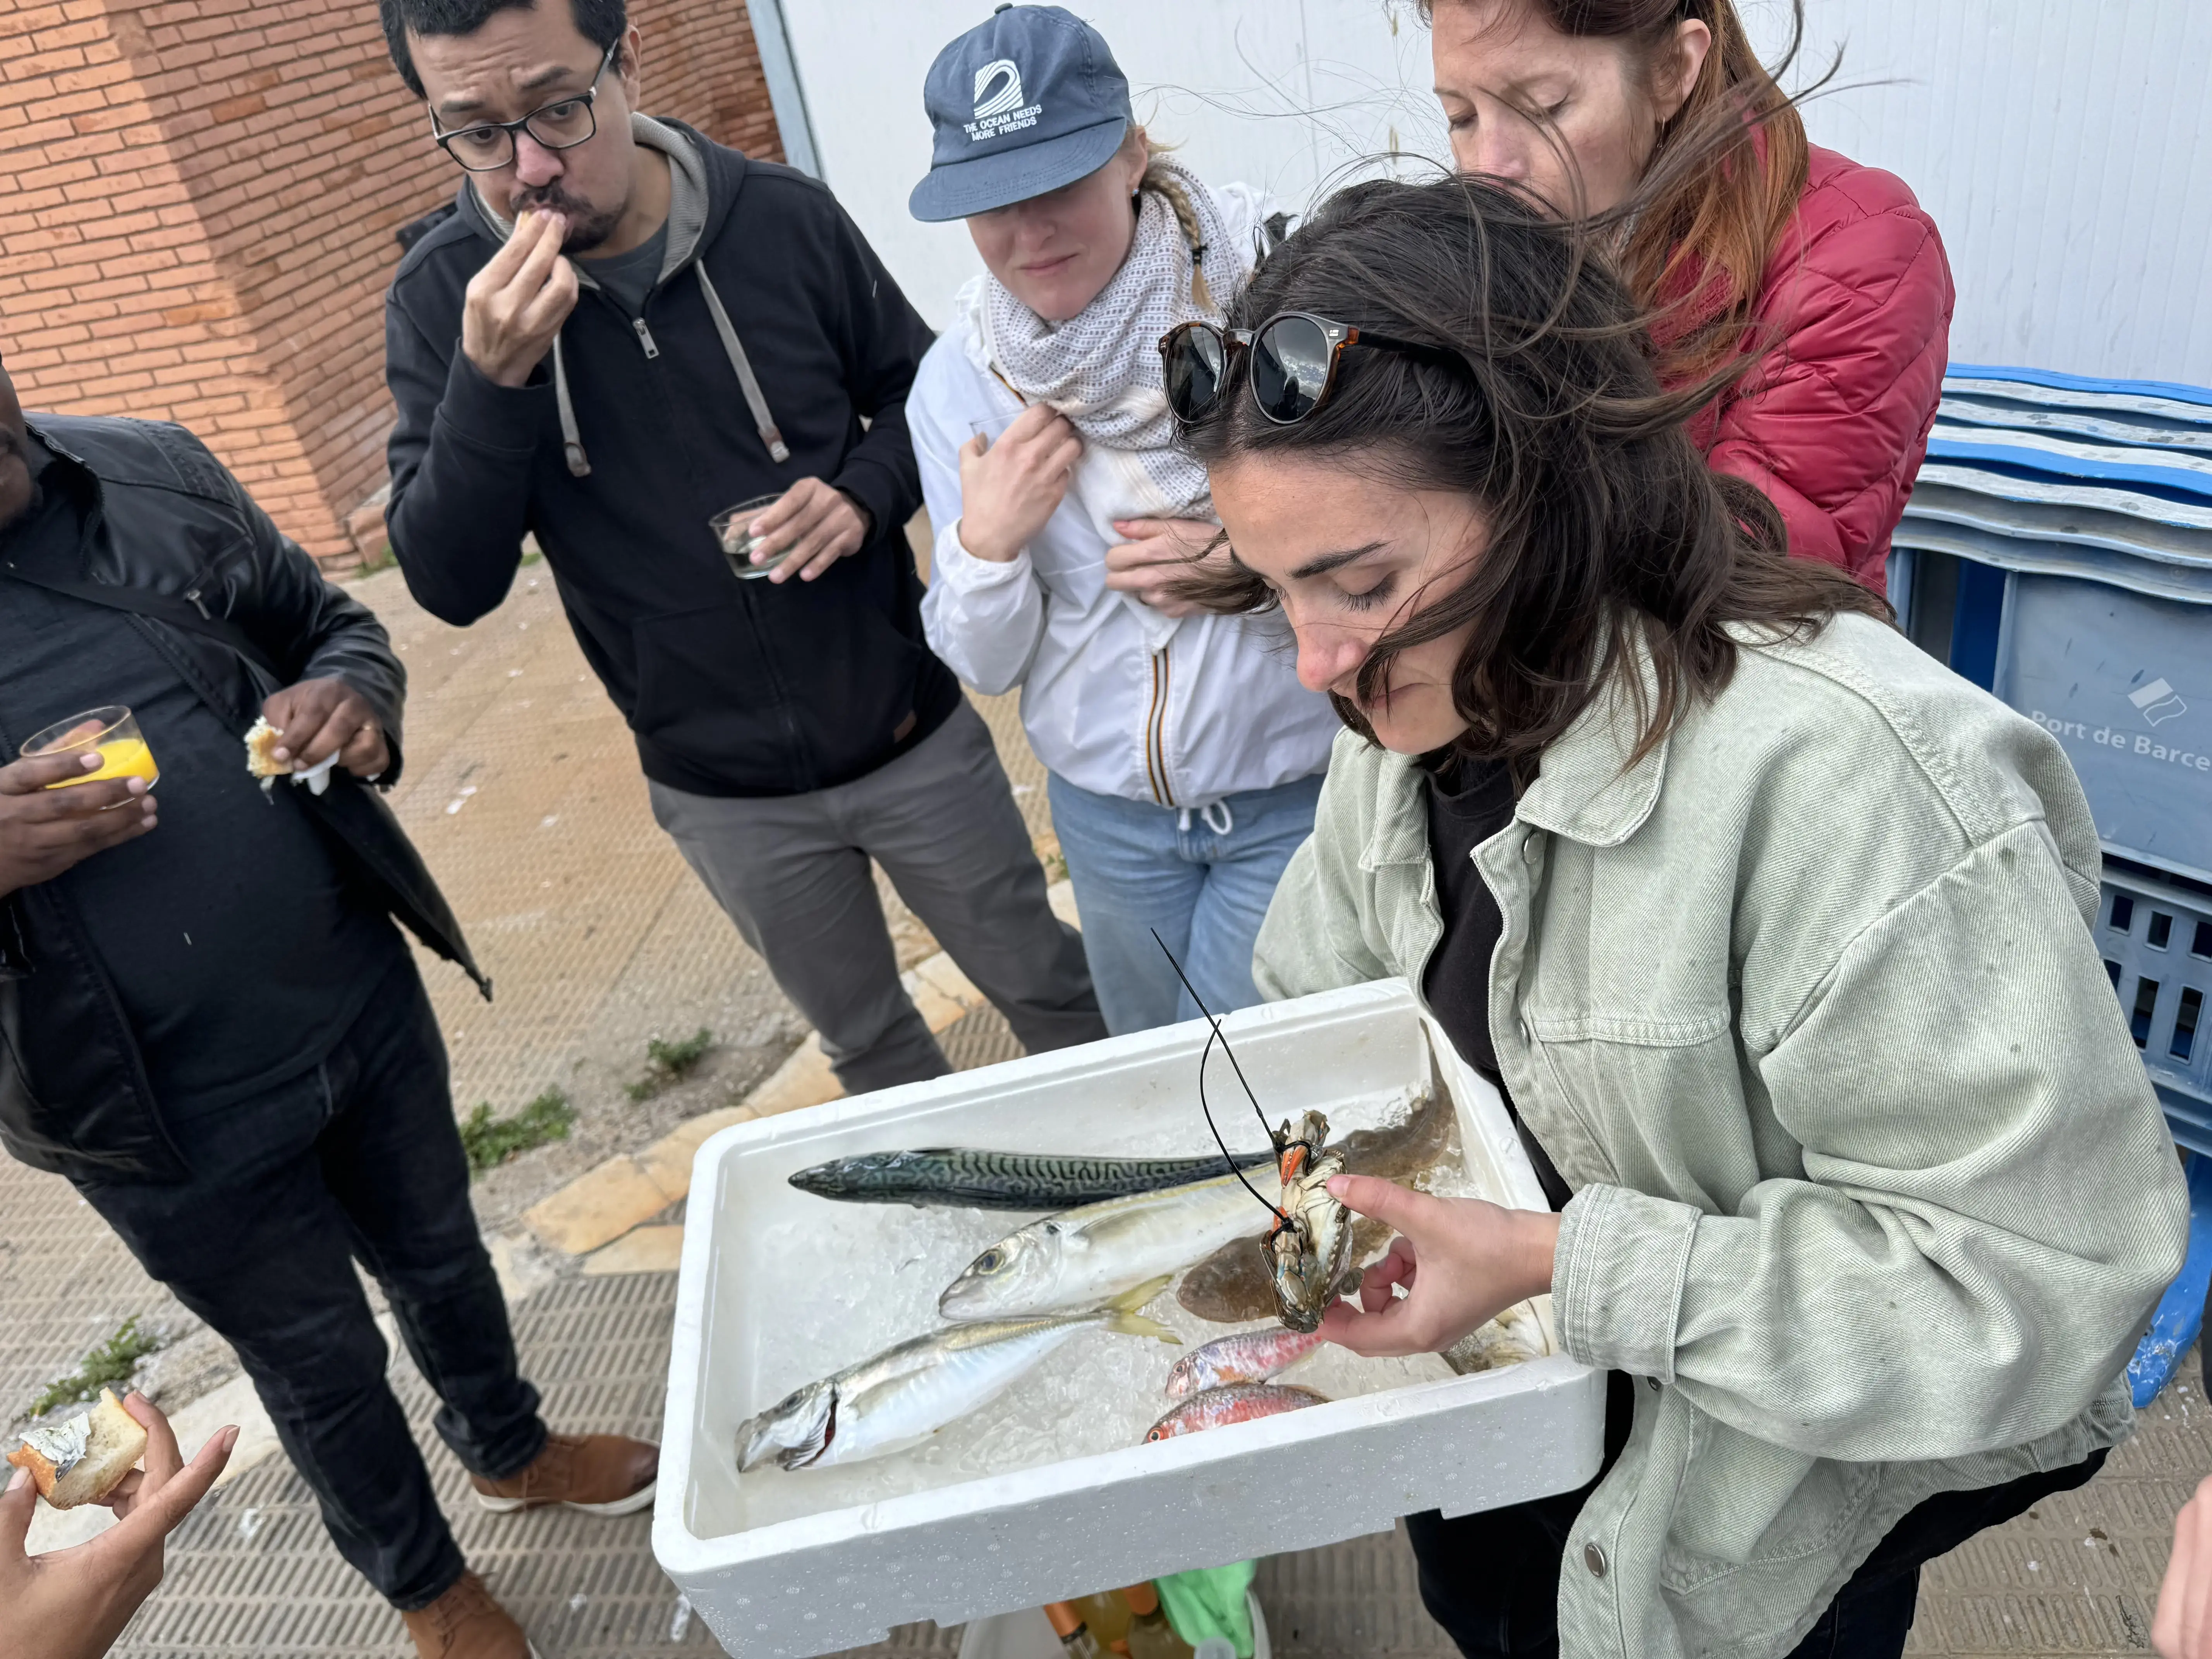 A woman shows a box with fish in it to the group